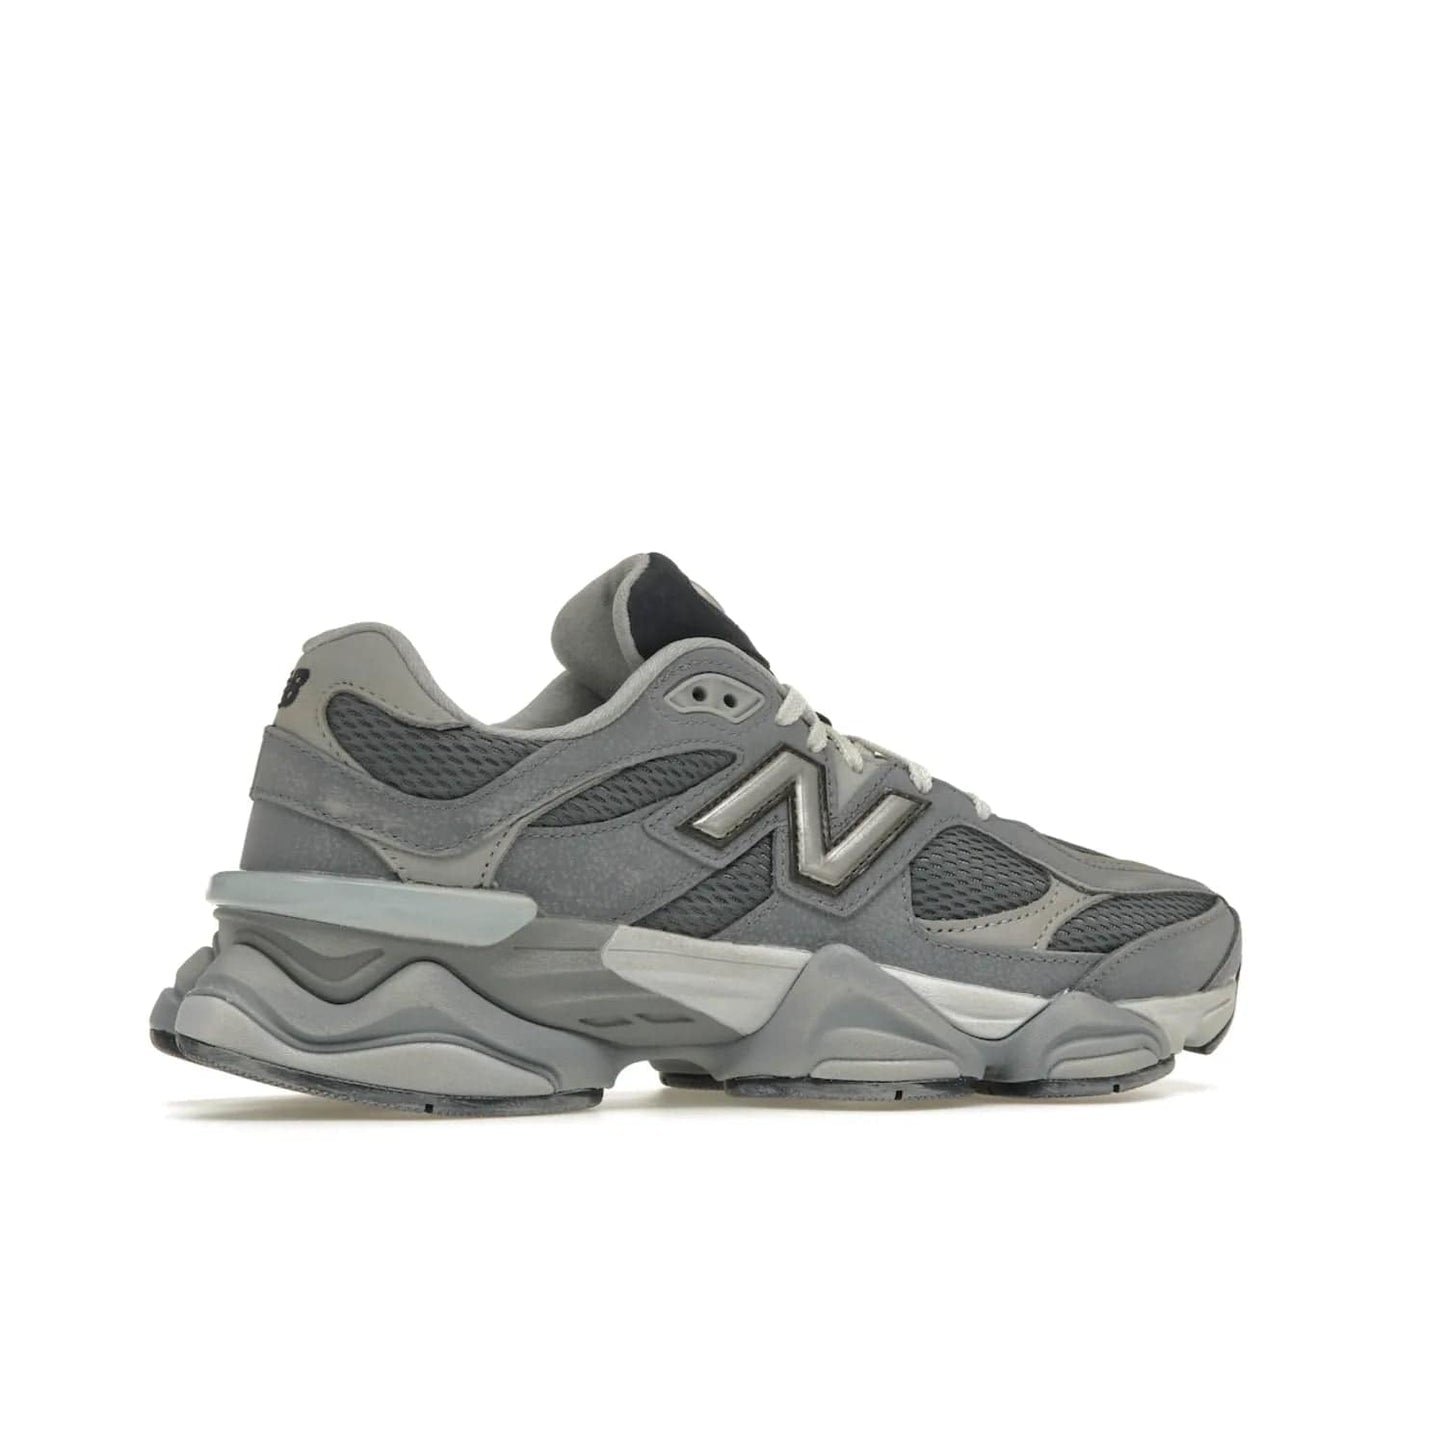 New Balance 9060 Grey Day (2023) - Image 35 - Only at www.BallersClubKickz.com - #
Sporty-meets-stylish in the New Balance 9060 Grey Day sneaker. Designed with Arctic Grey, Steel, and Silver Metallic, it offers an edgy but wearable look along with classic NB comfort and quality.